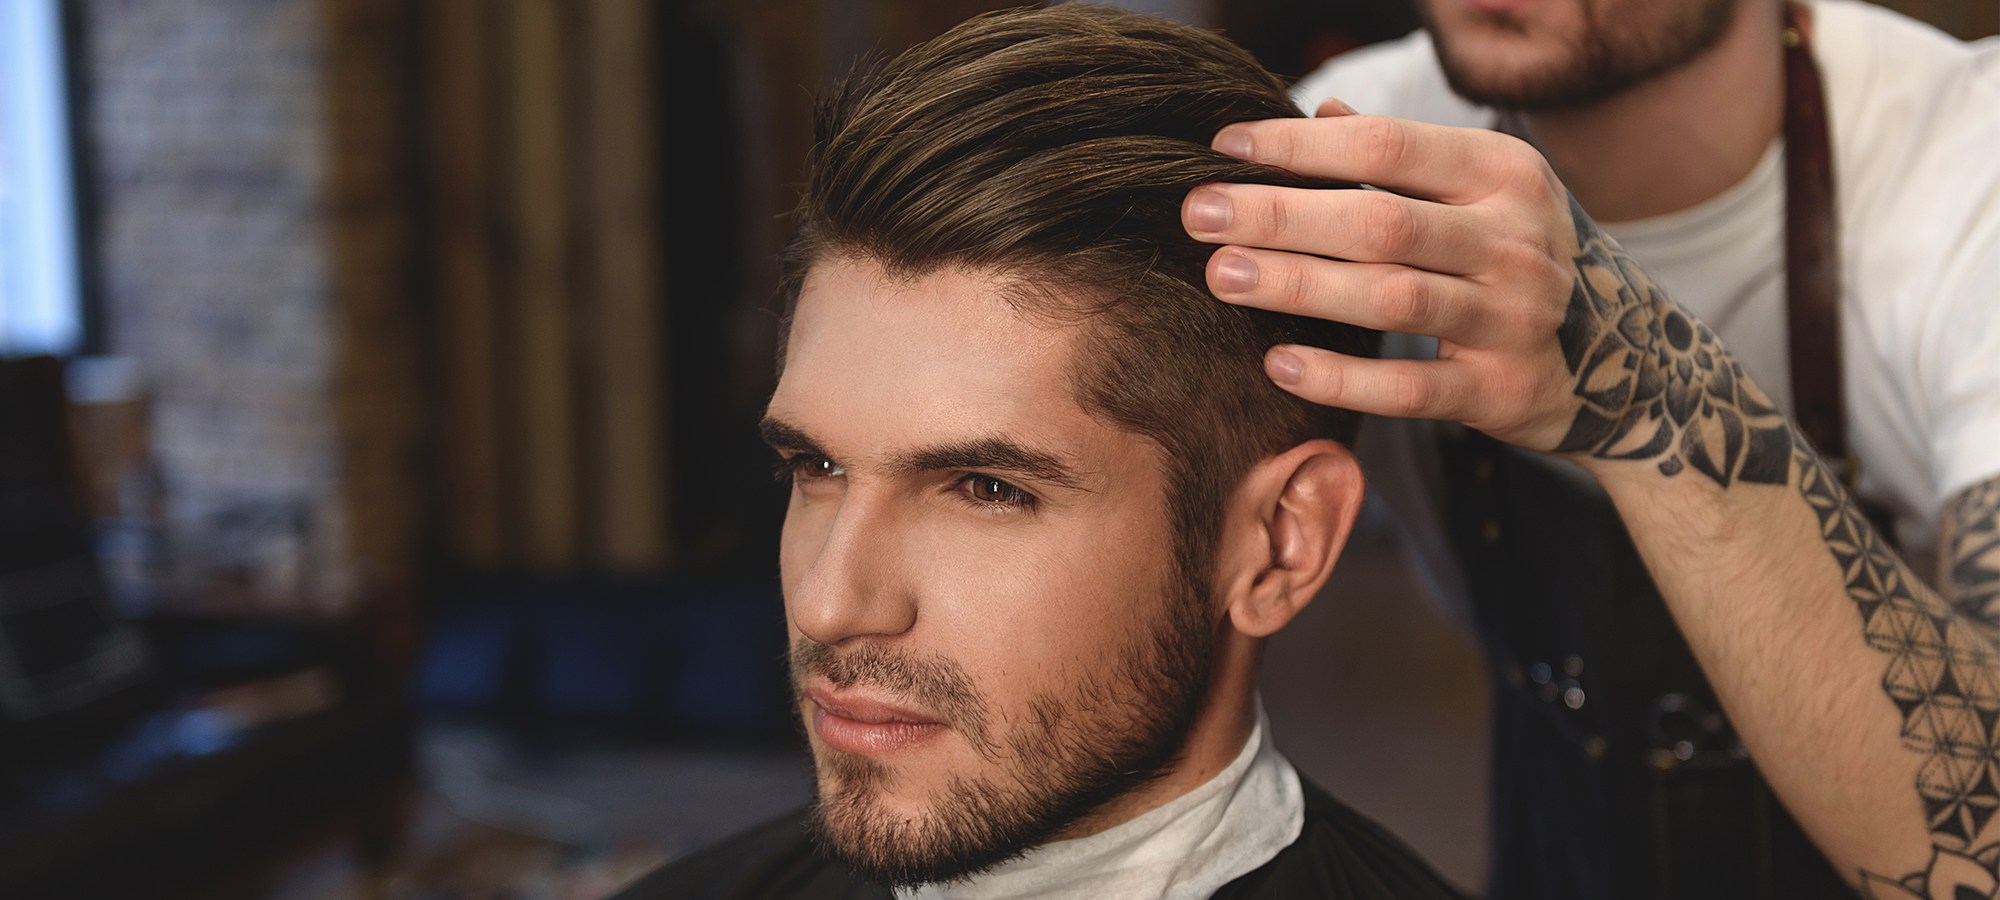 Side Swept Hairstyle For Oval Face Men - FashionBuzzer.com